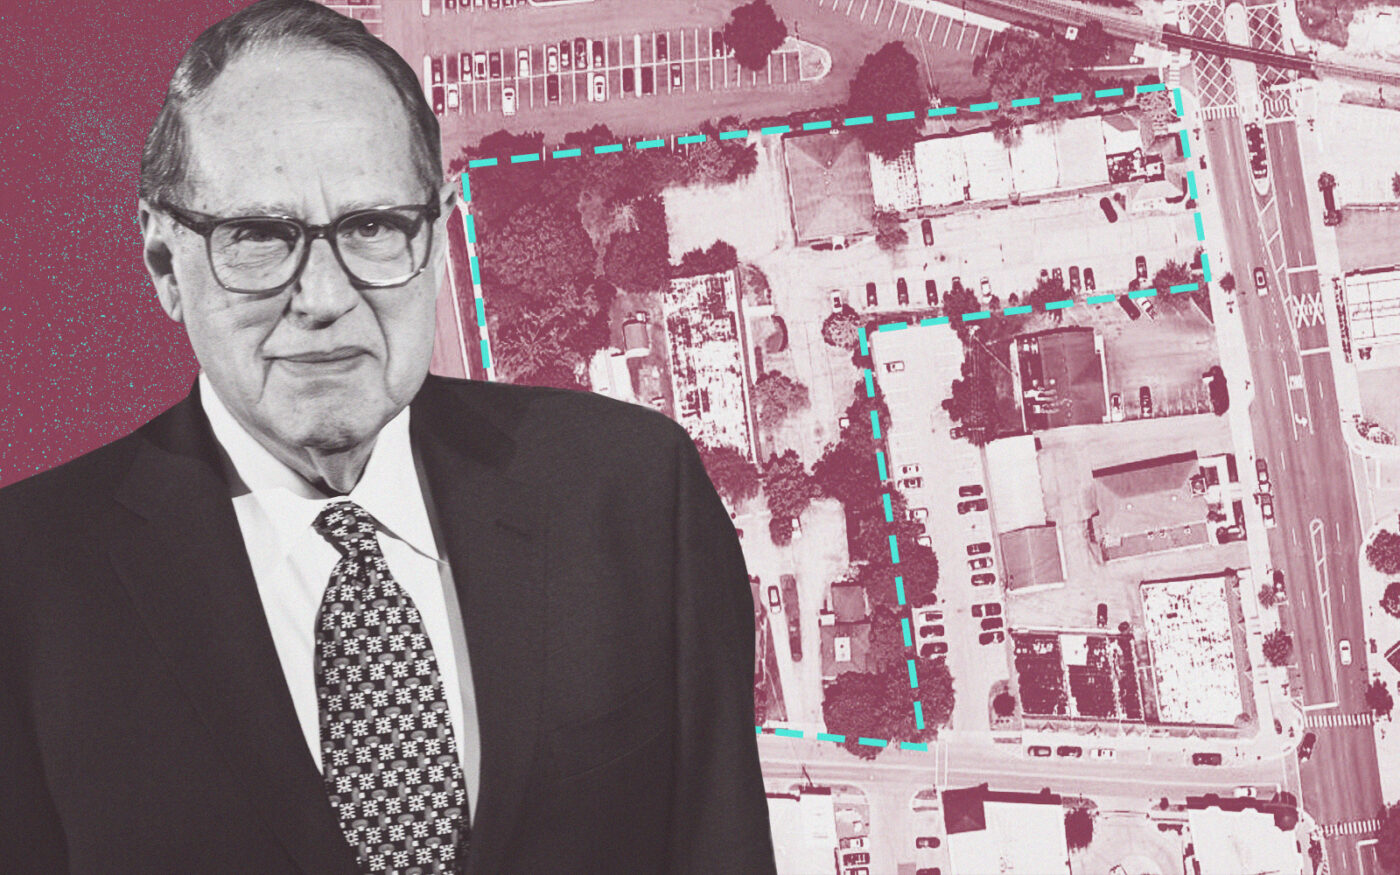 Reinsdorf-Backed Firm Targets Libertyville for 91 Units